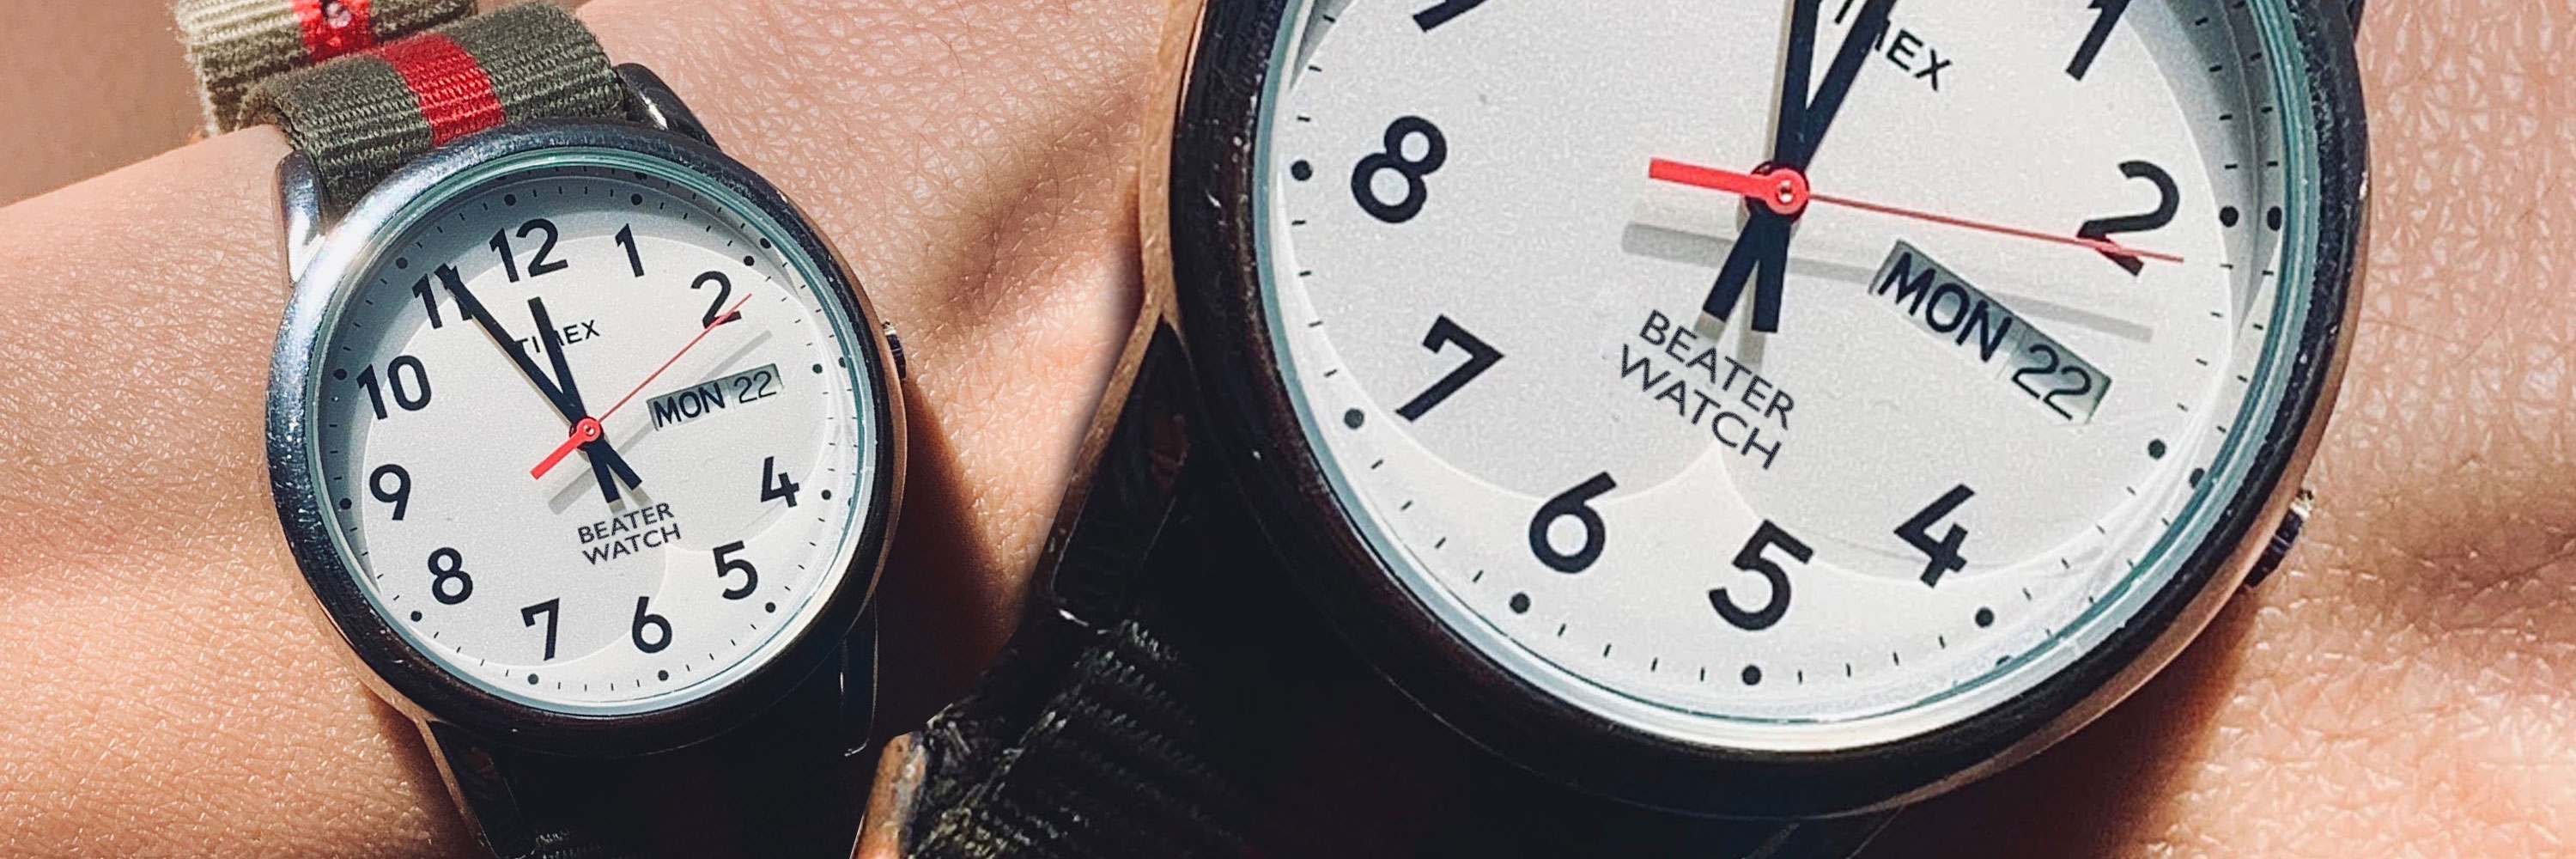 The Best Beater Watches Under $200: 13 Affordable, Durable Watches You Can Wear Every Day